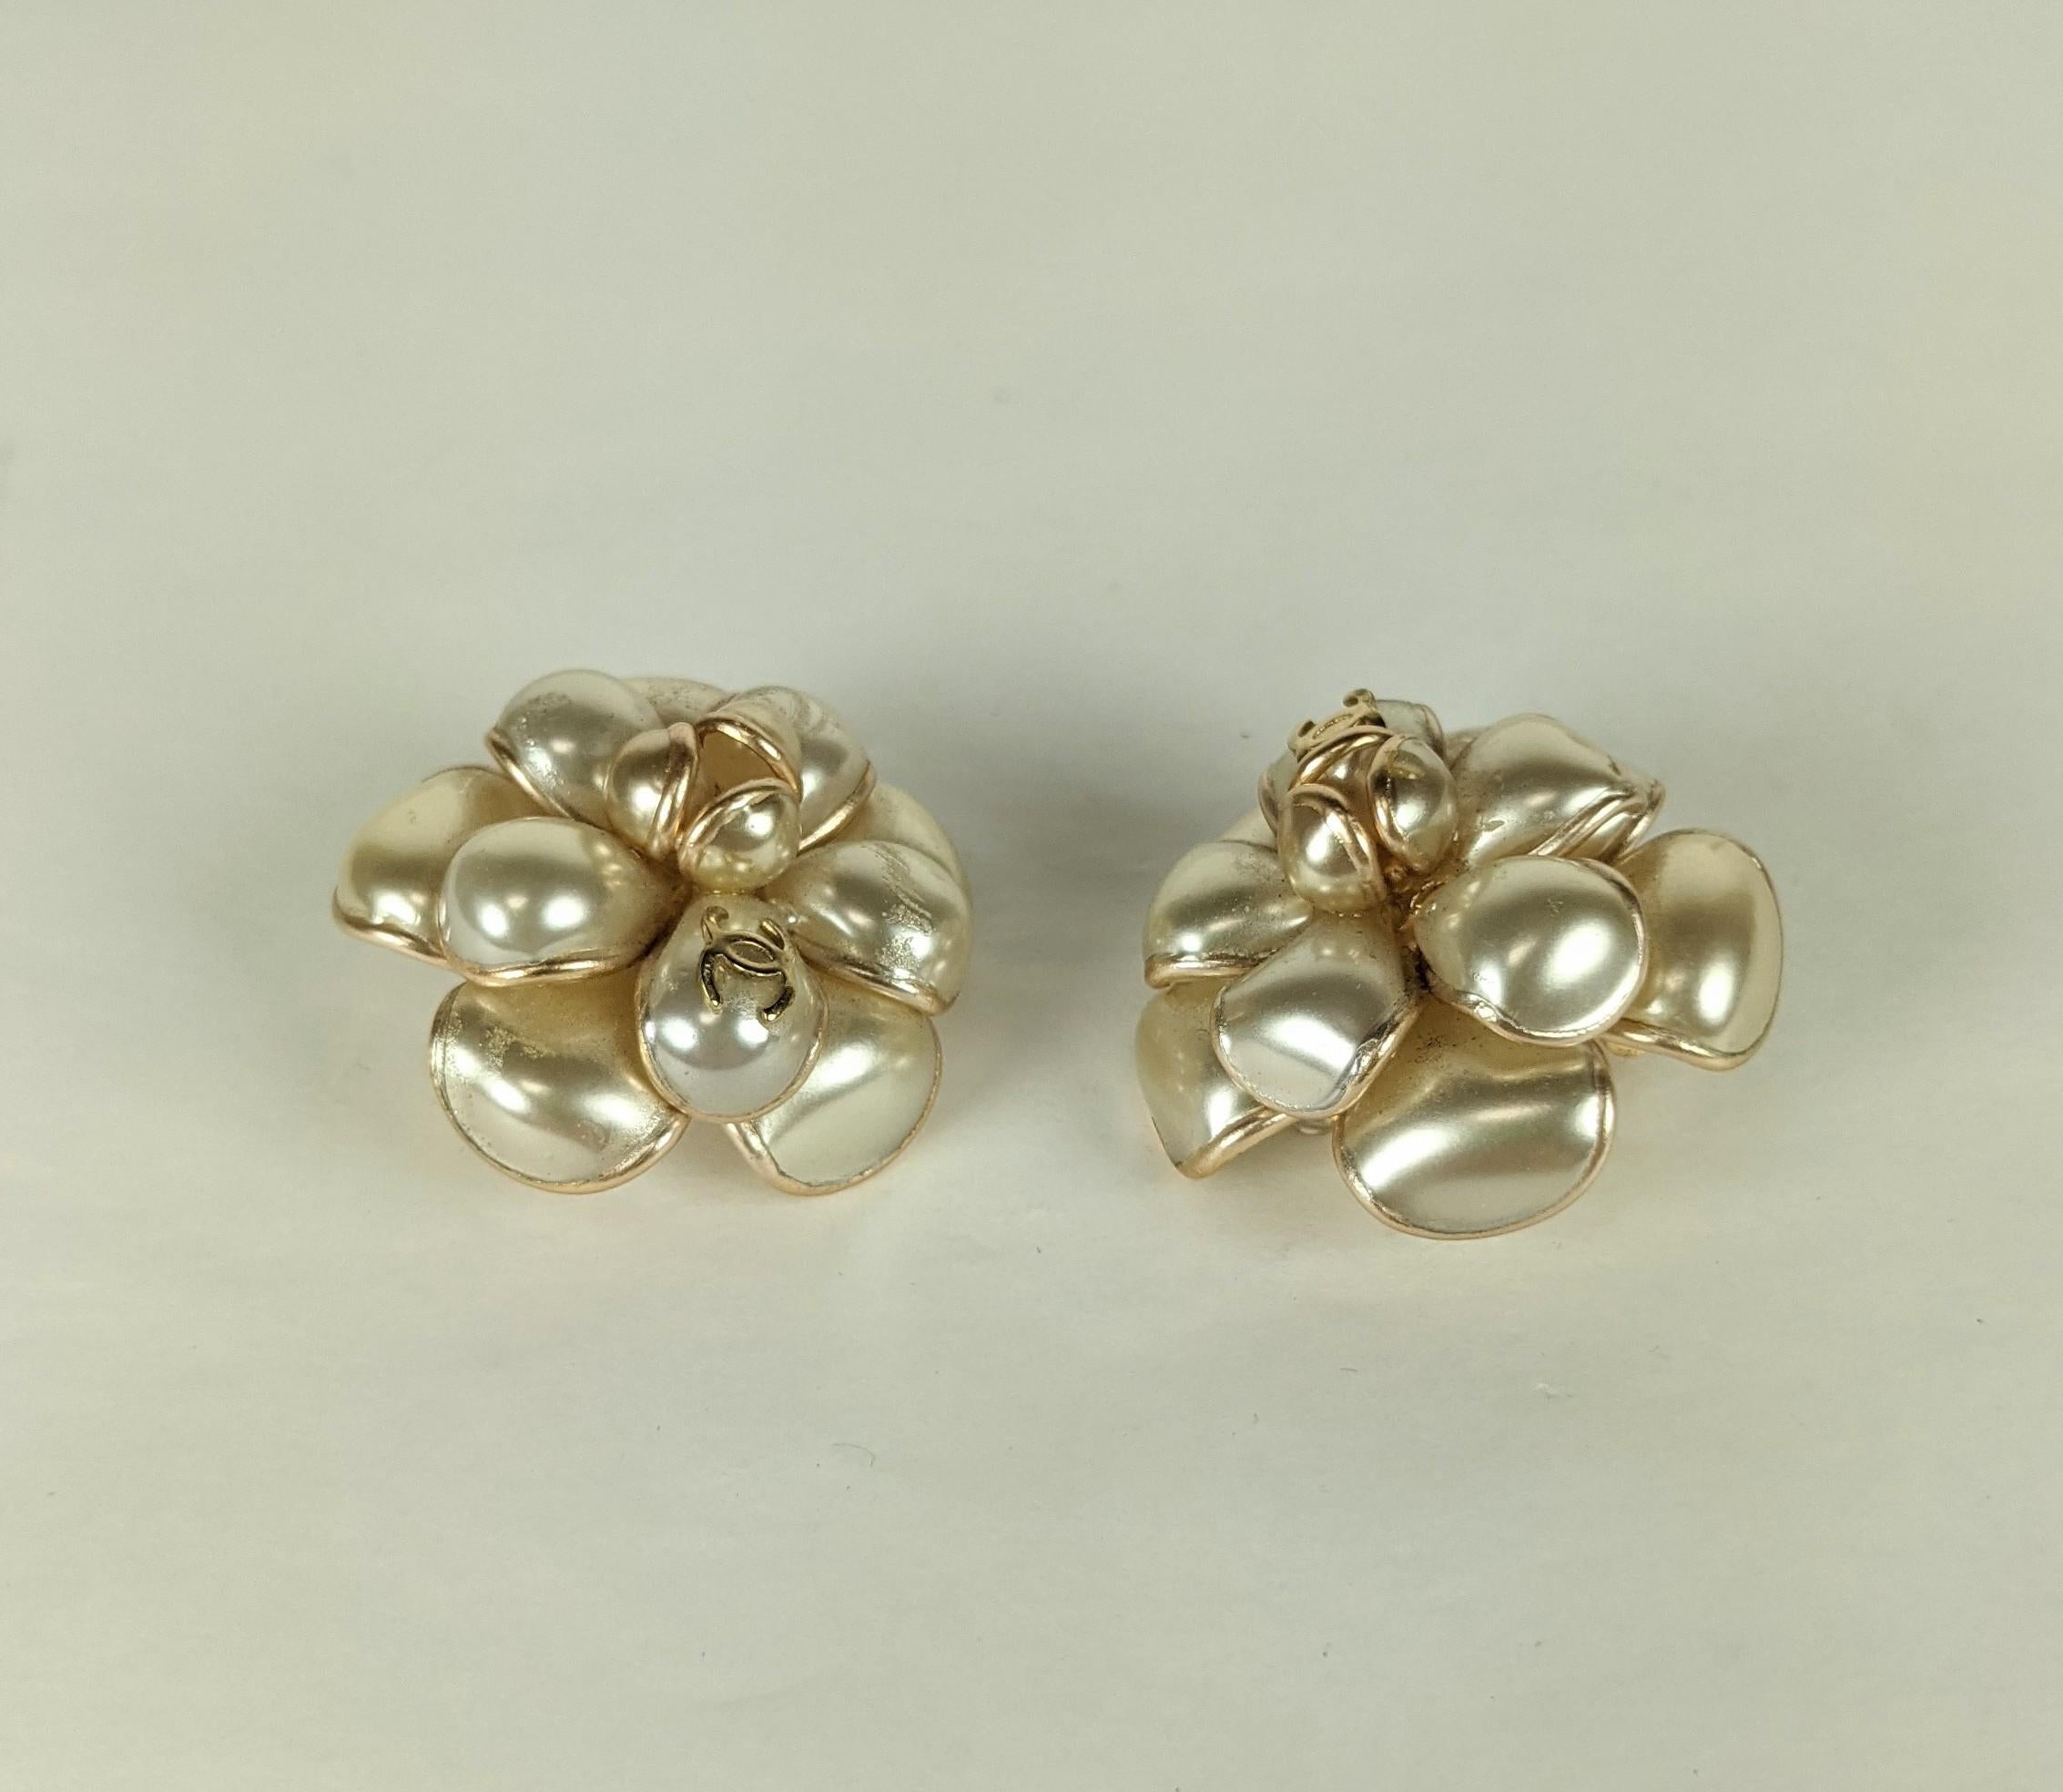 Chanel Pearlized Poured Glass Camellia Earrings In Good Condition For Sale In New York, NY